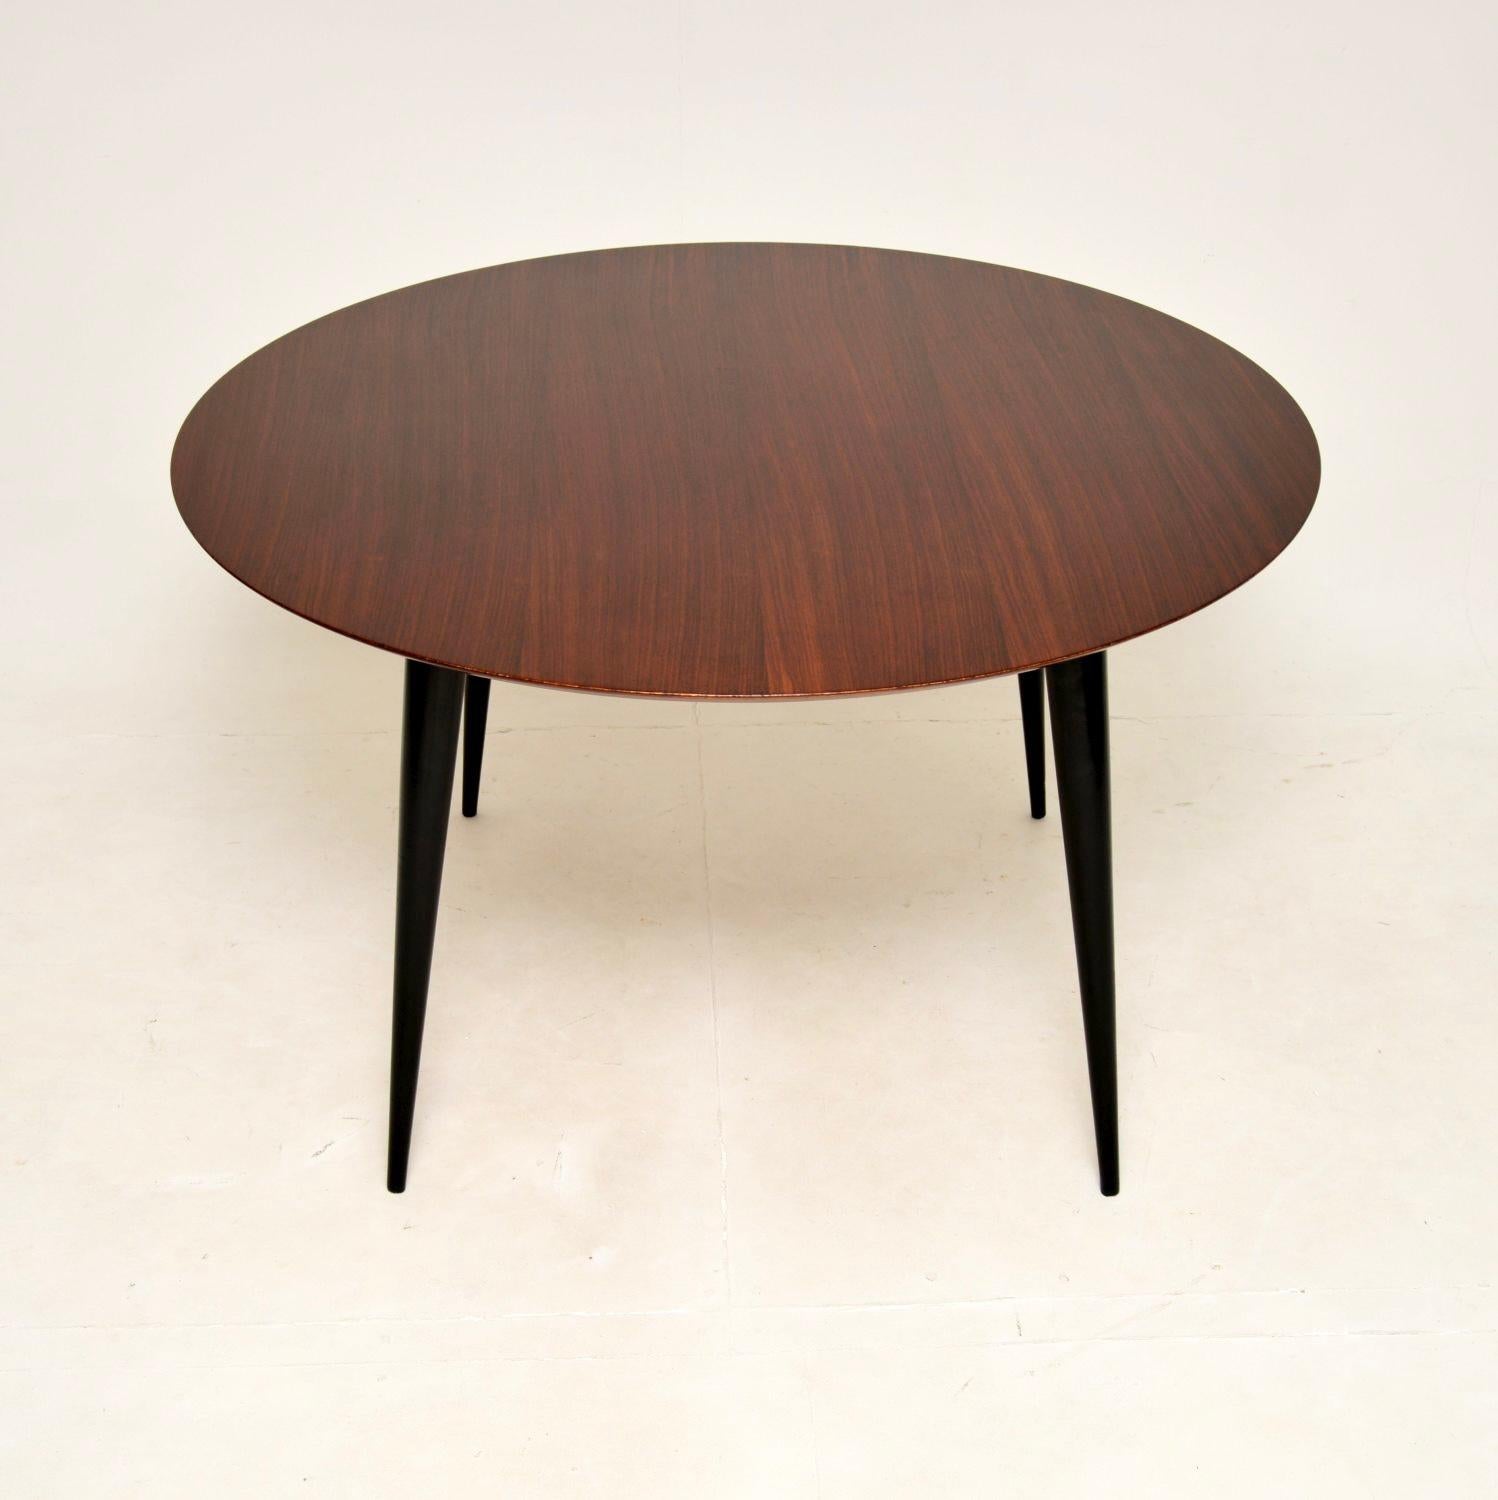 A gorgeous vintage dining table, made in England and dating from the 1960’s.

This is of superb quality, the beautiful circular top has lovely chamfered edges. This sits on stunning tapered legs which are ebonised wood.

We have had this stripped